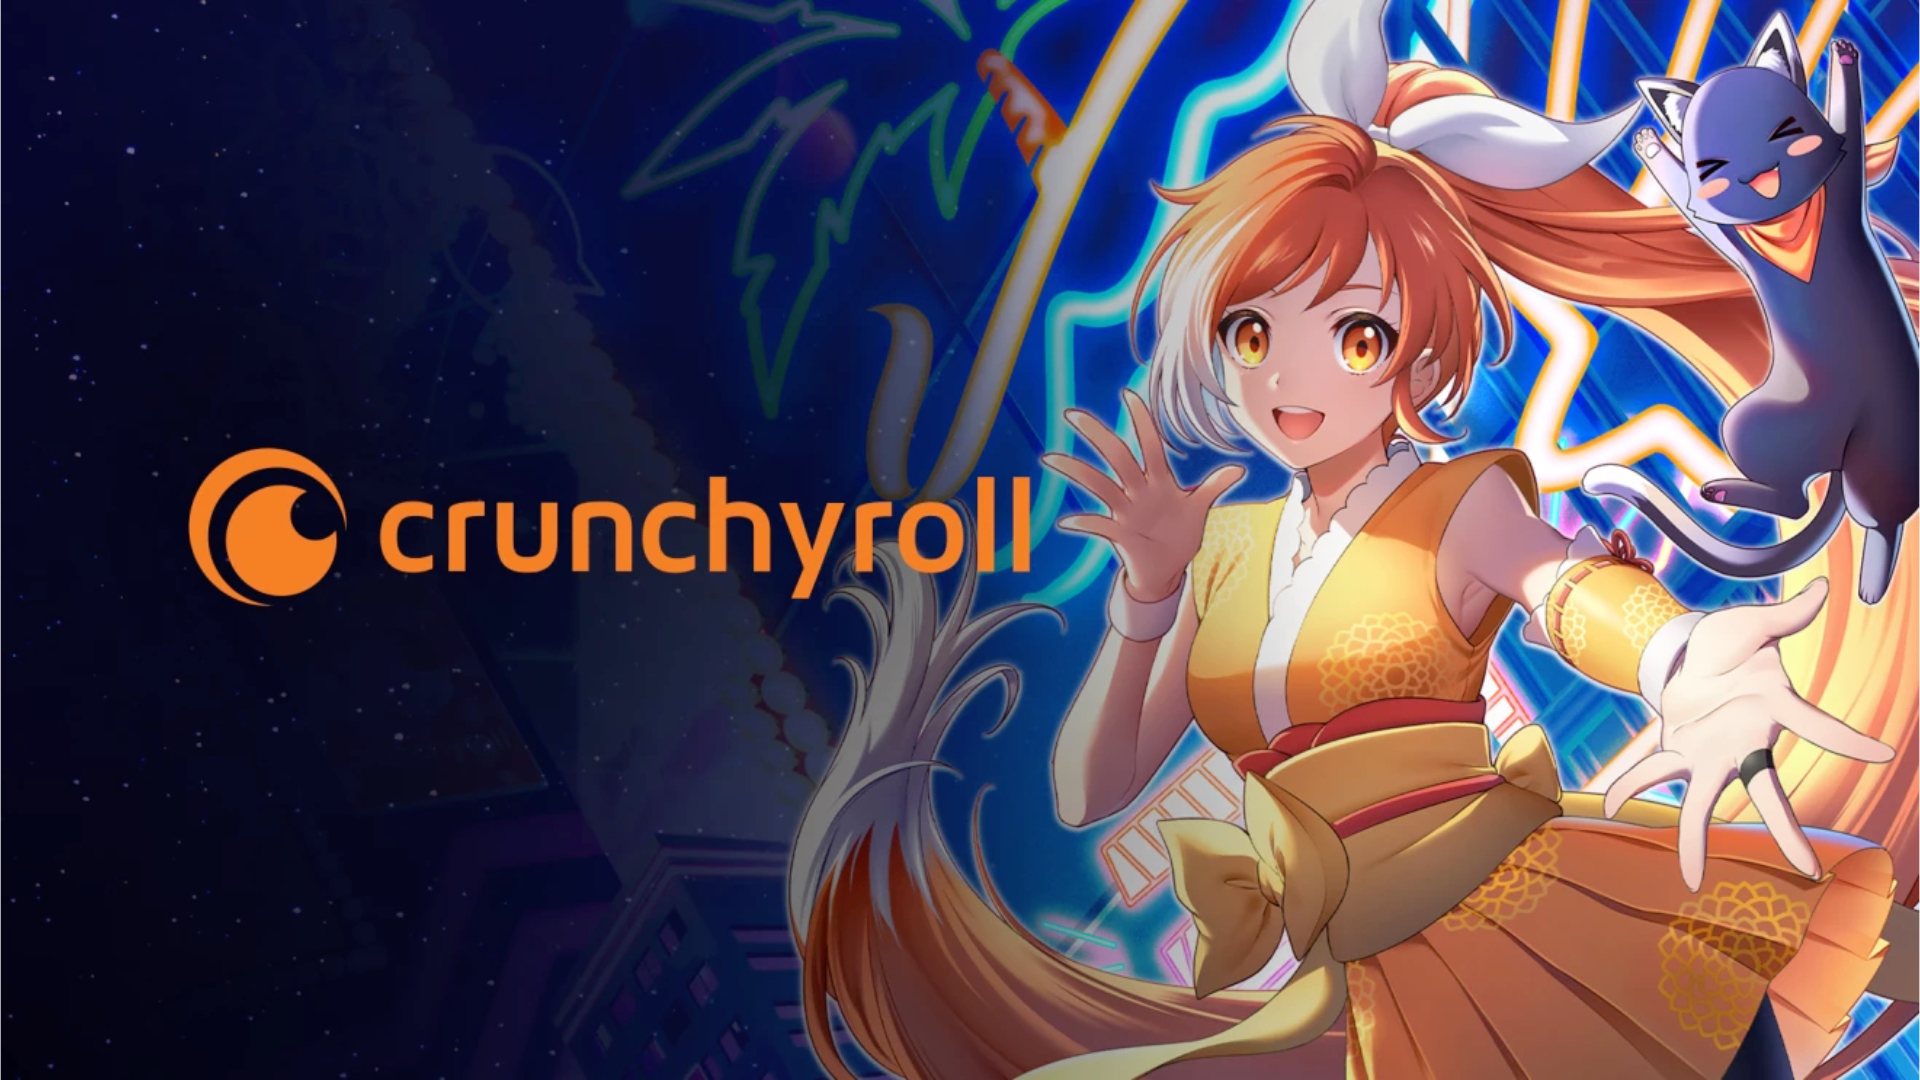 How come usually the monthly price 7.99 but here it's higher : r/Crunchyroll